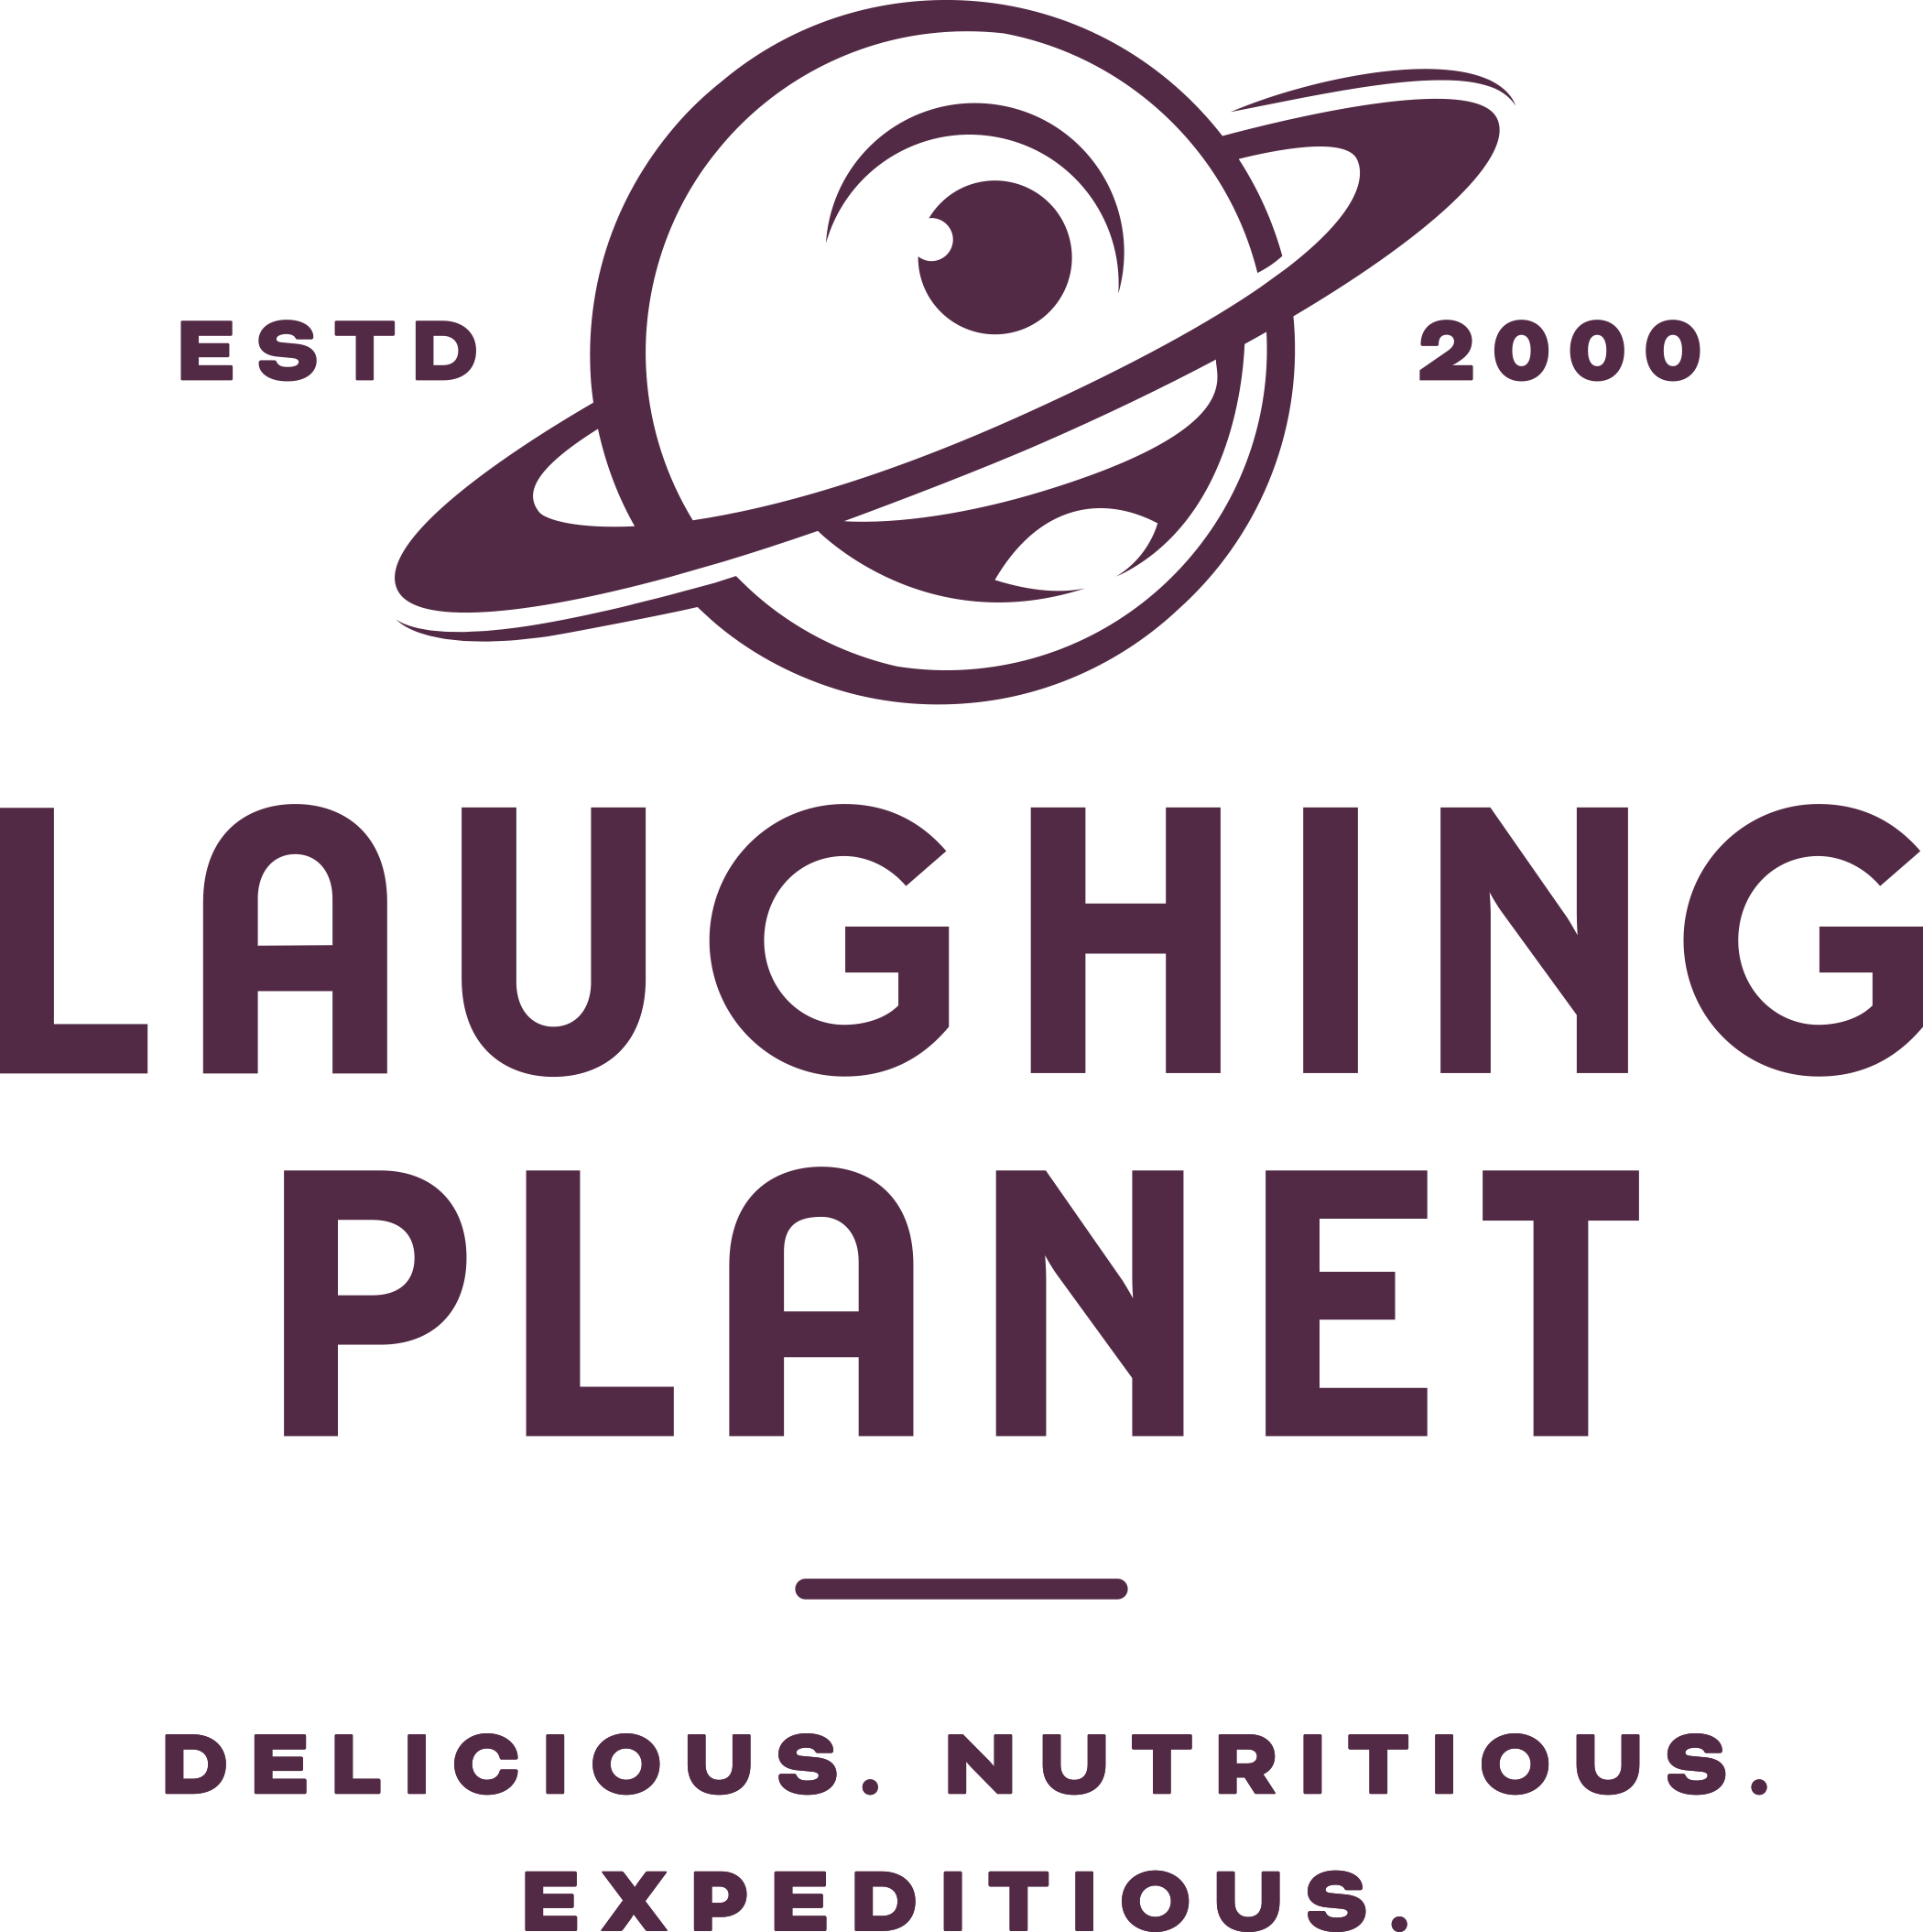 Laughing Planet